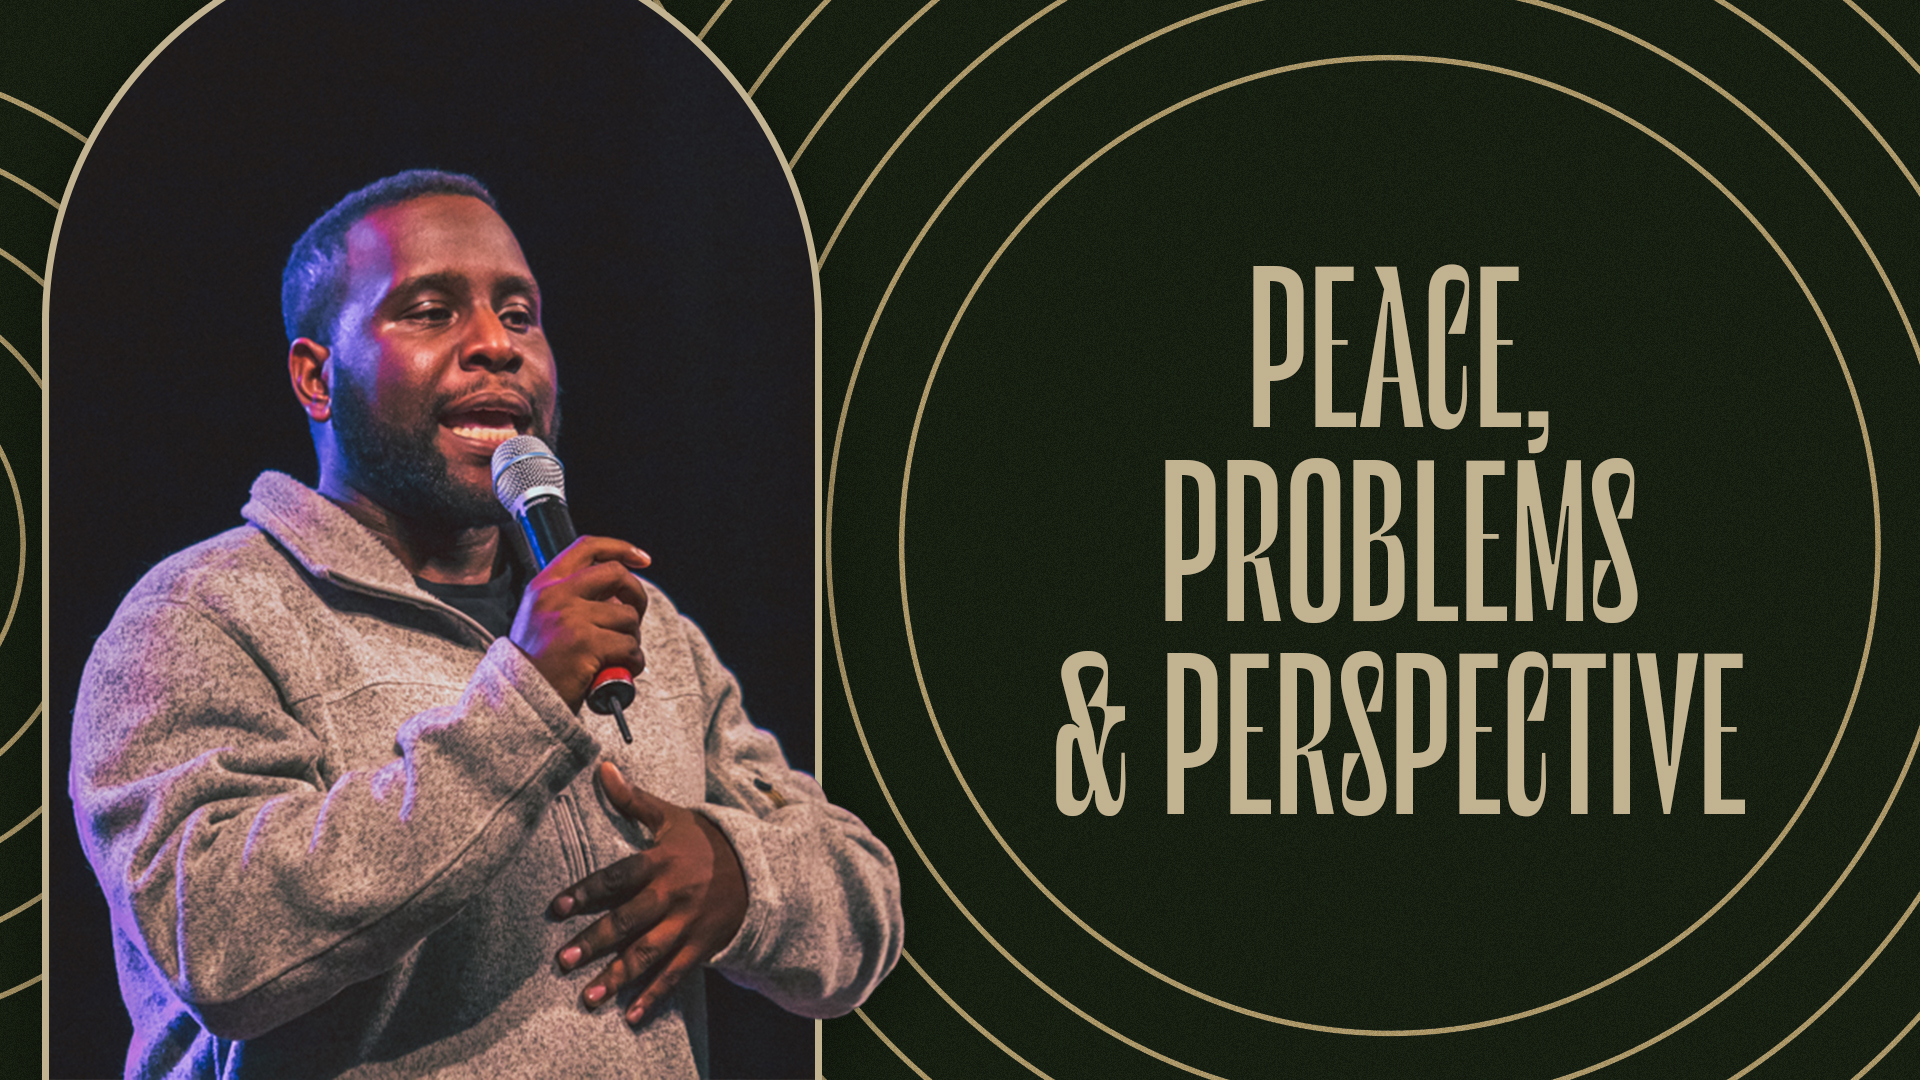 Peace, Problems, & Perspective